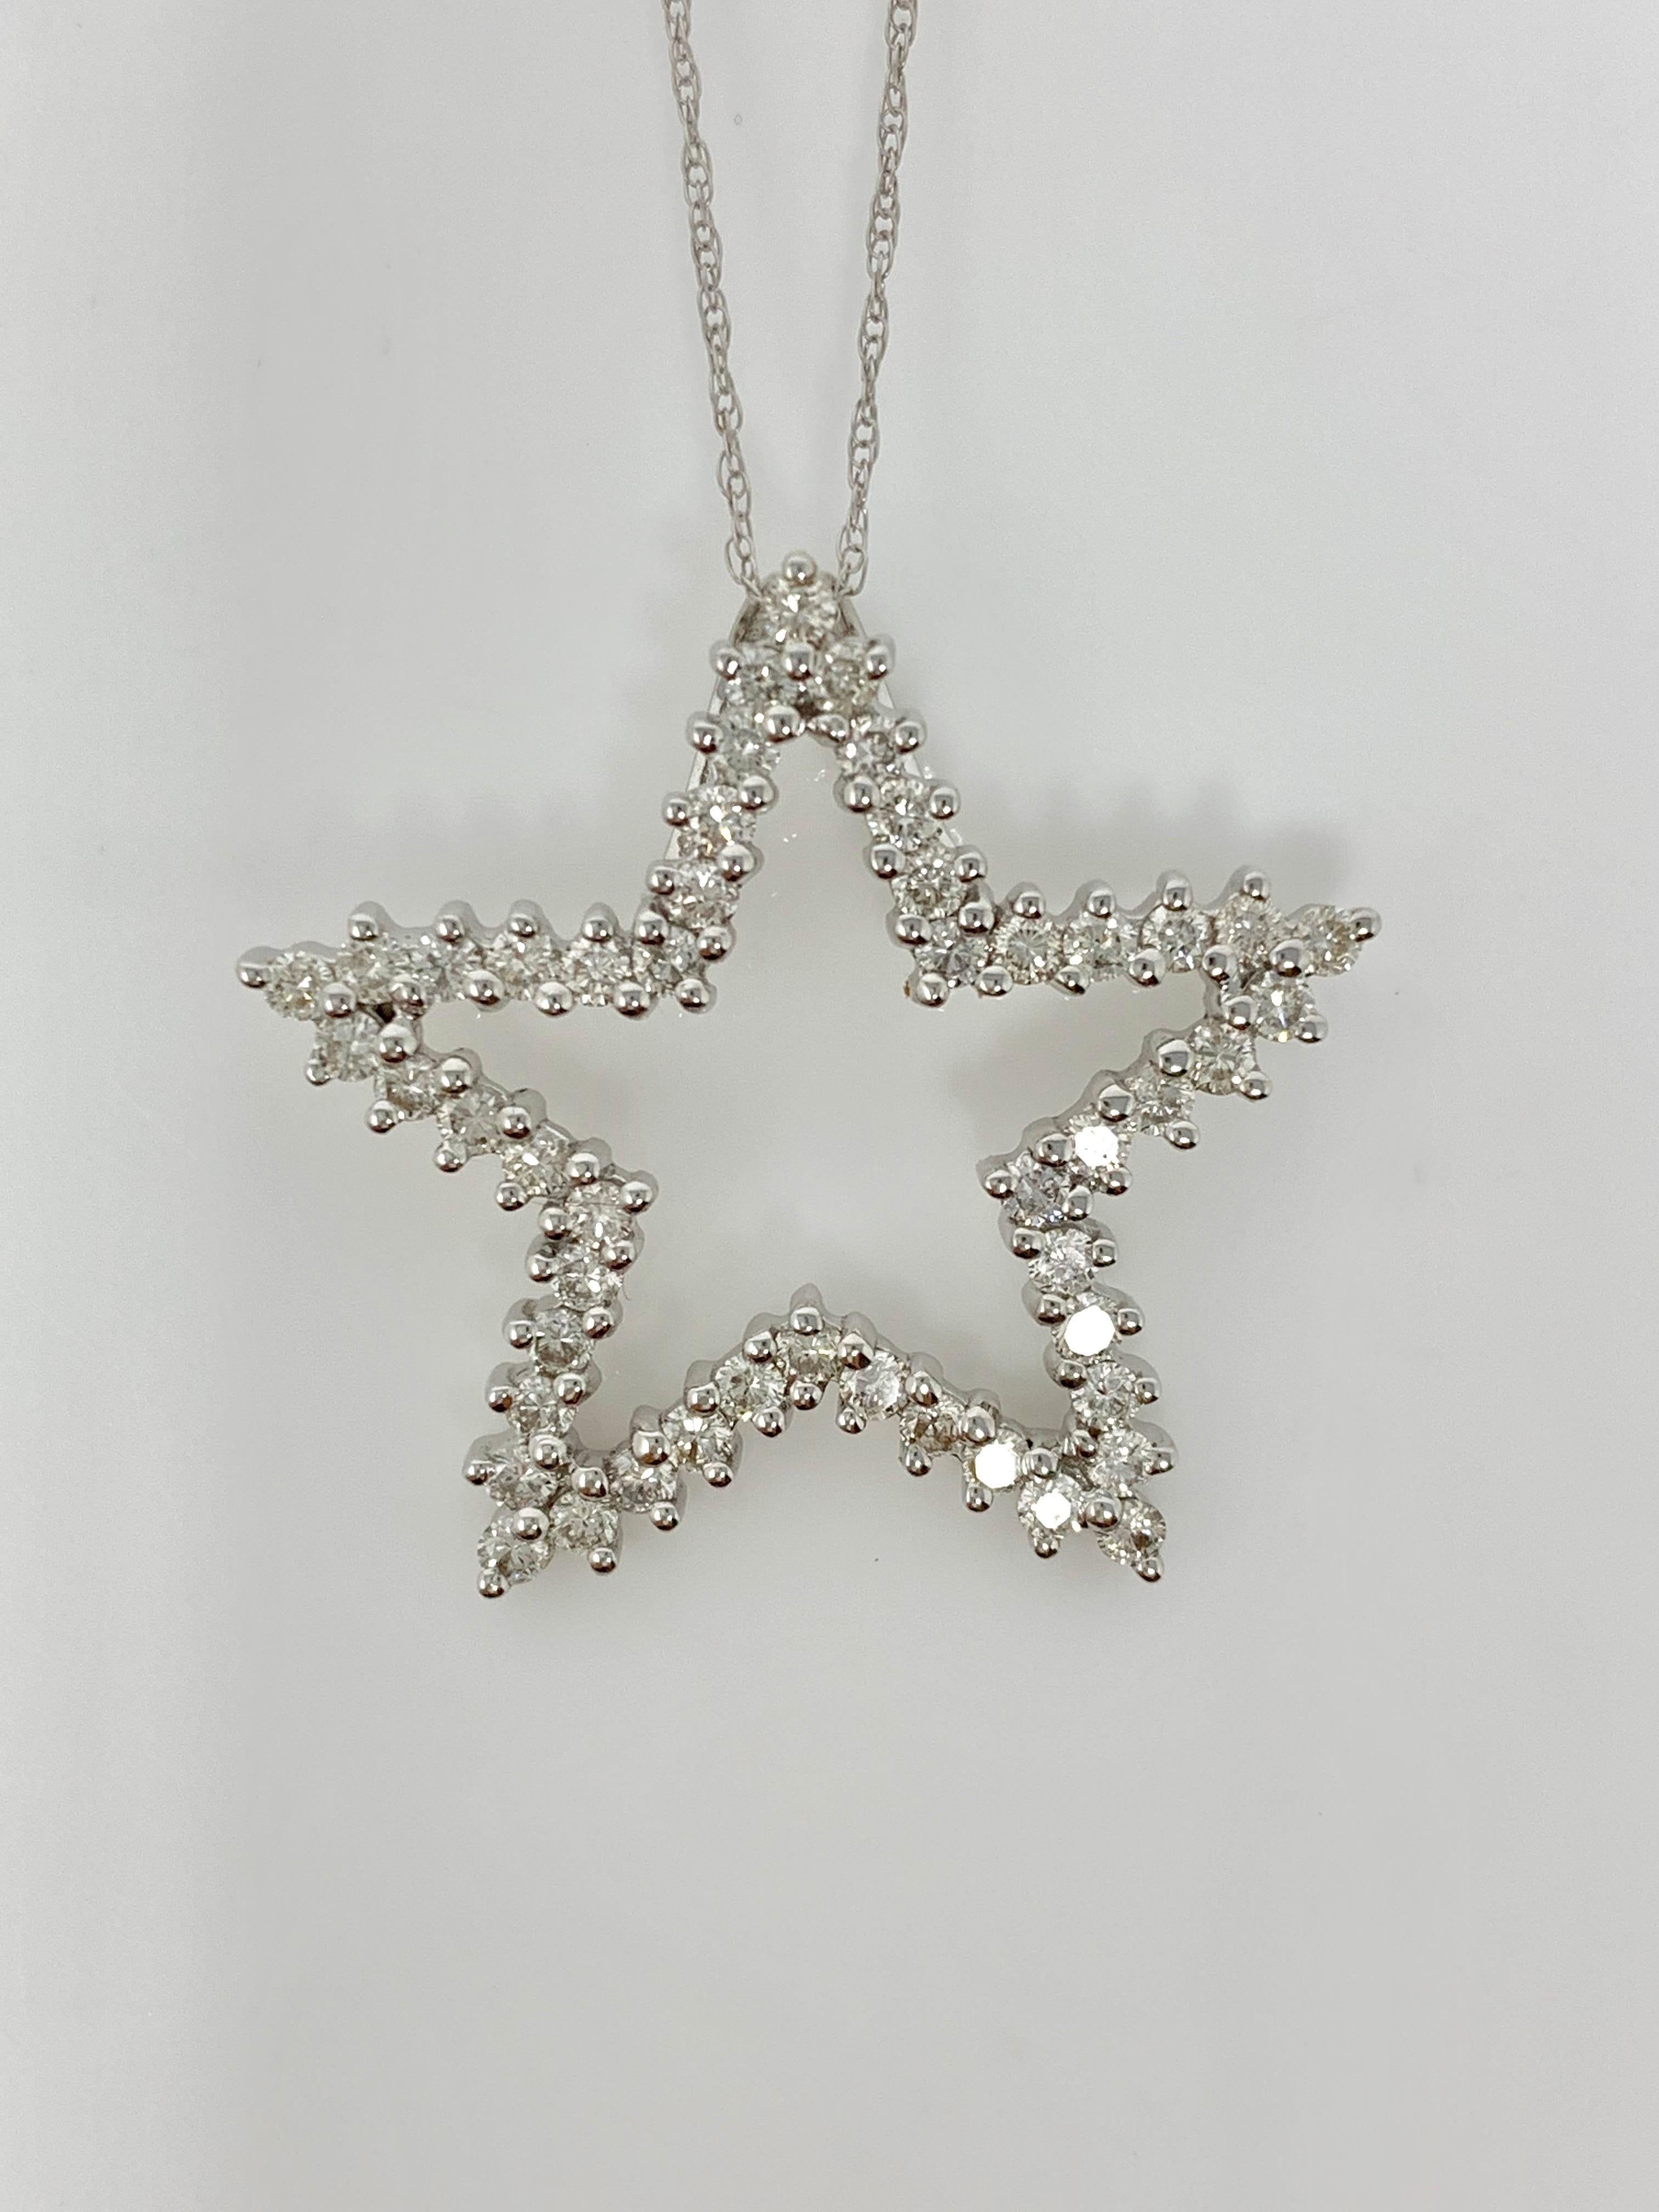 This attractive and trendy Tiffany style white diamond star pendant is handcrafted in 14k white gold.
The diamond weight is 1.07 carat with I  color and SI clarity. 
The measurements are 1 inch by 1 inch. 
